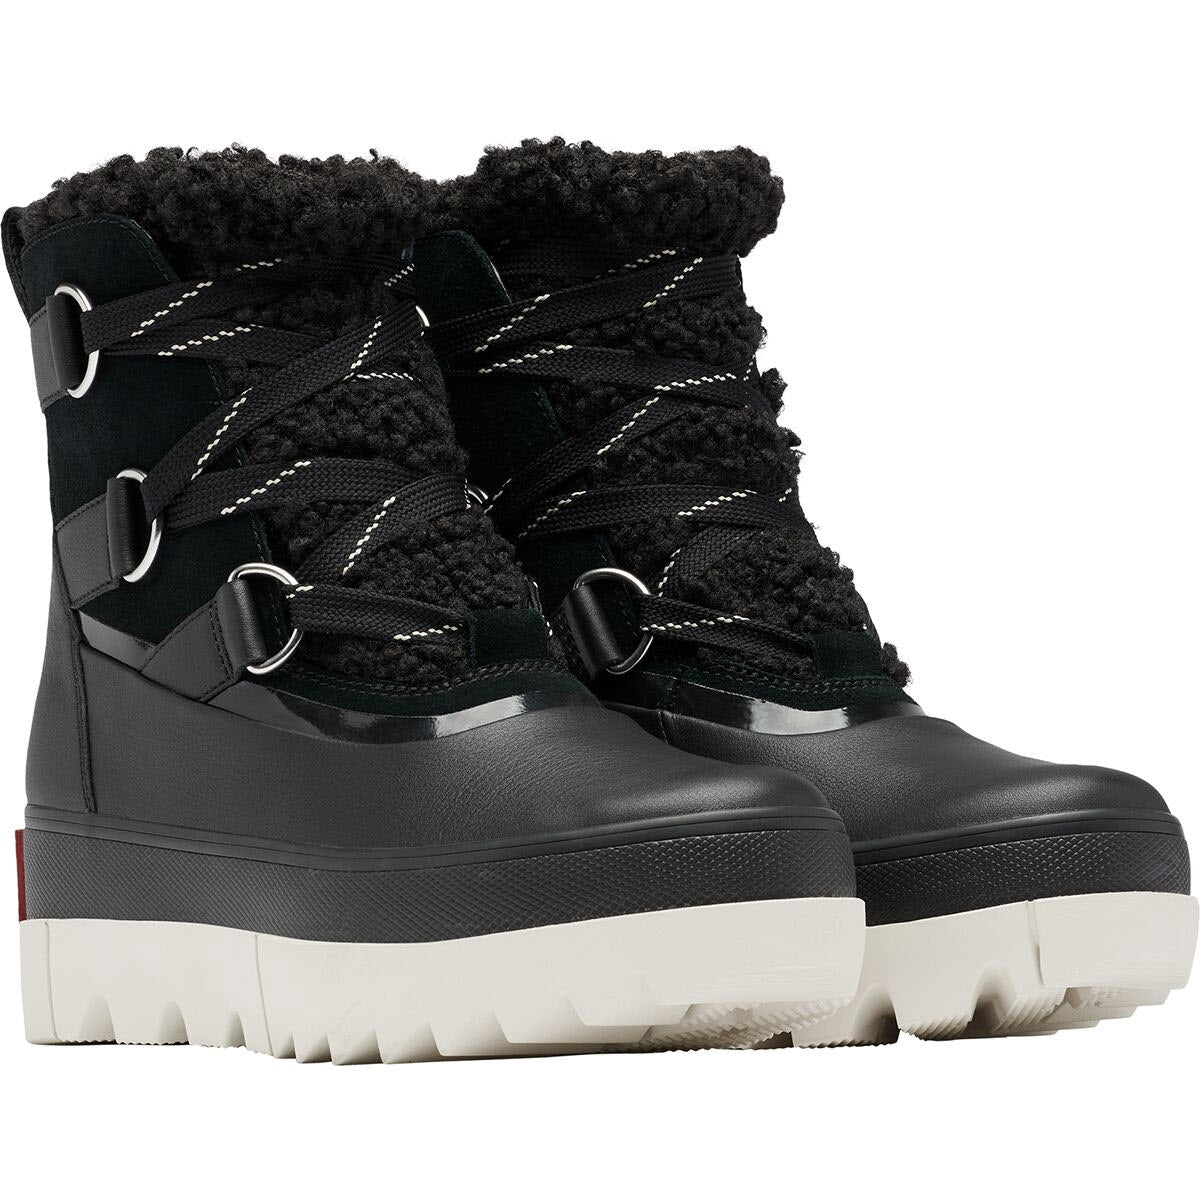 A pair of SOREL JOAN OF ARCTIC NEXT BOOT BLACK - WOMENS by Sorel with white, high-traction soles and thick black laces. The boots feature a fluffy black lining, metal eyelets for the laces, and waterproof construction to keep your feet dry in any condition.